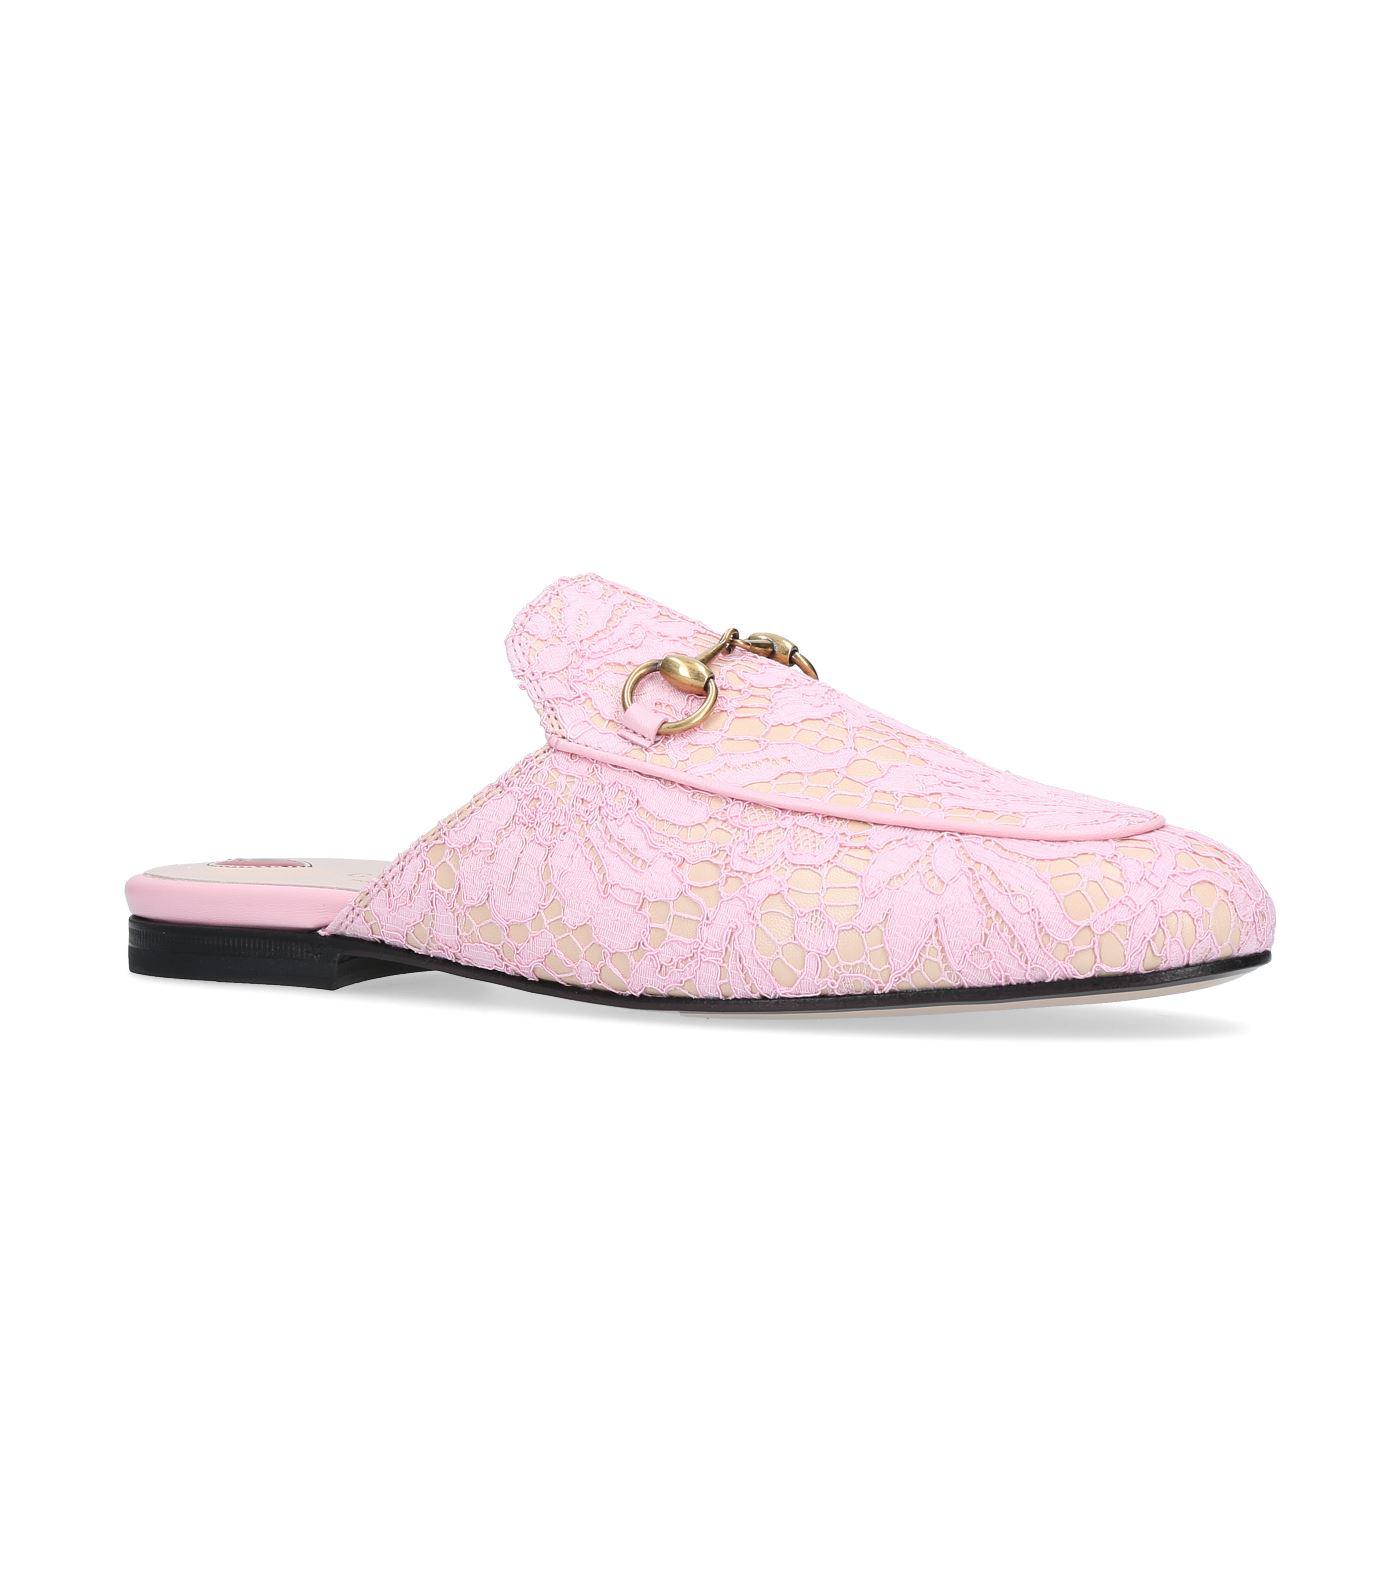 Gucci Pink Slippers Netherlands, SAVE 35% - aveclumiere.com